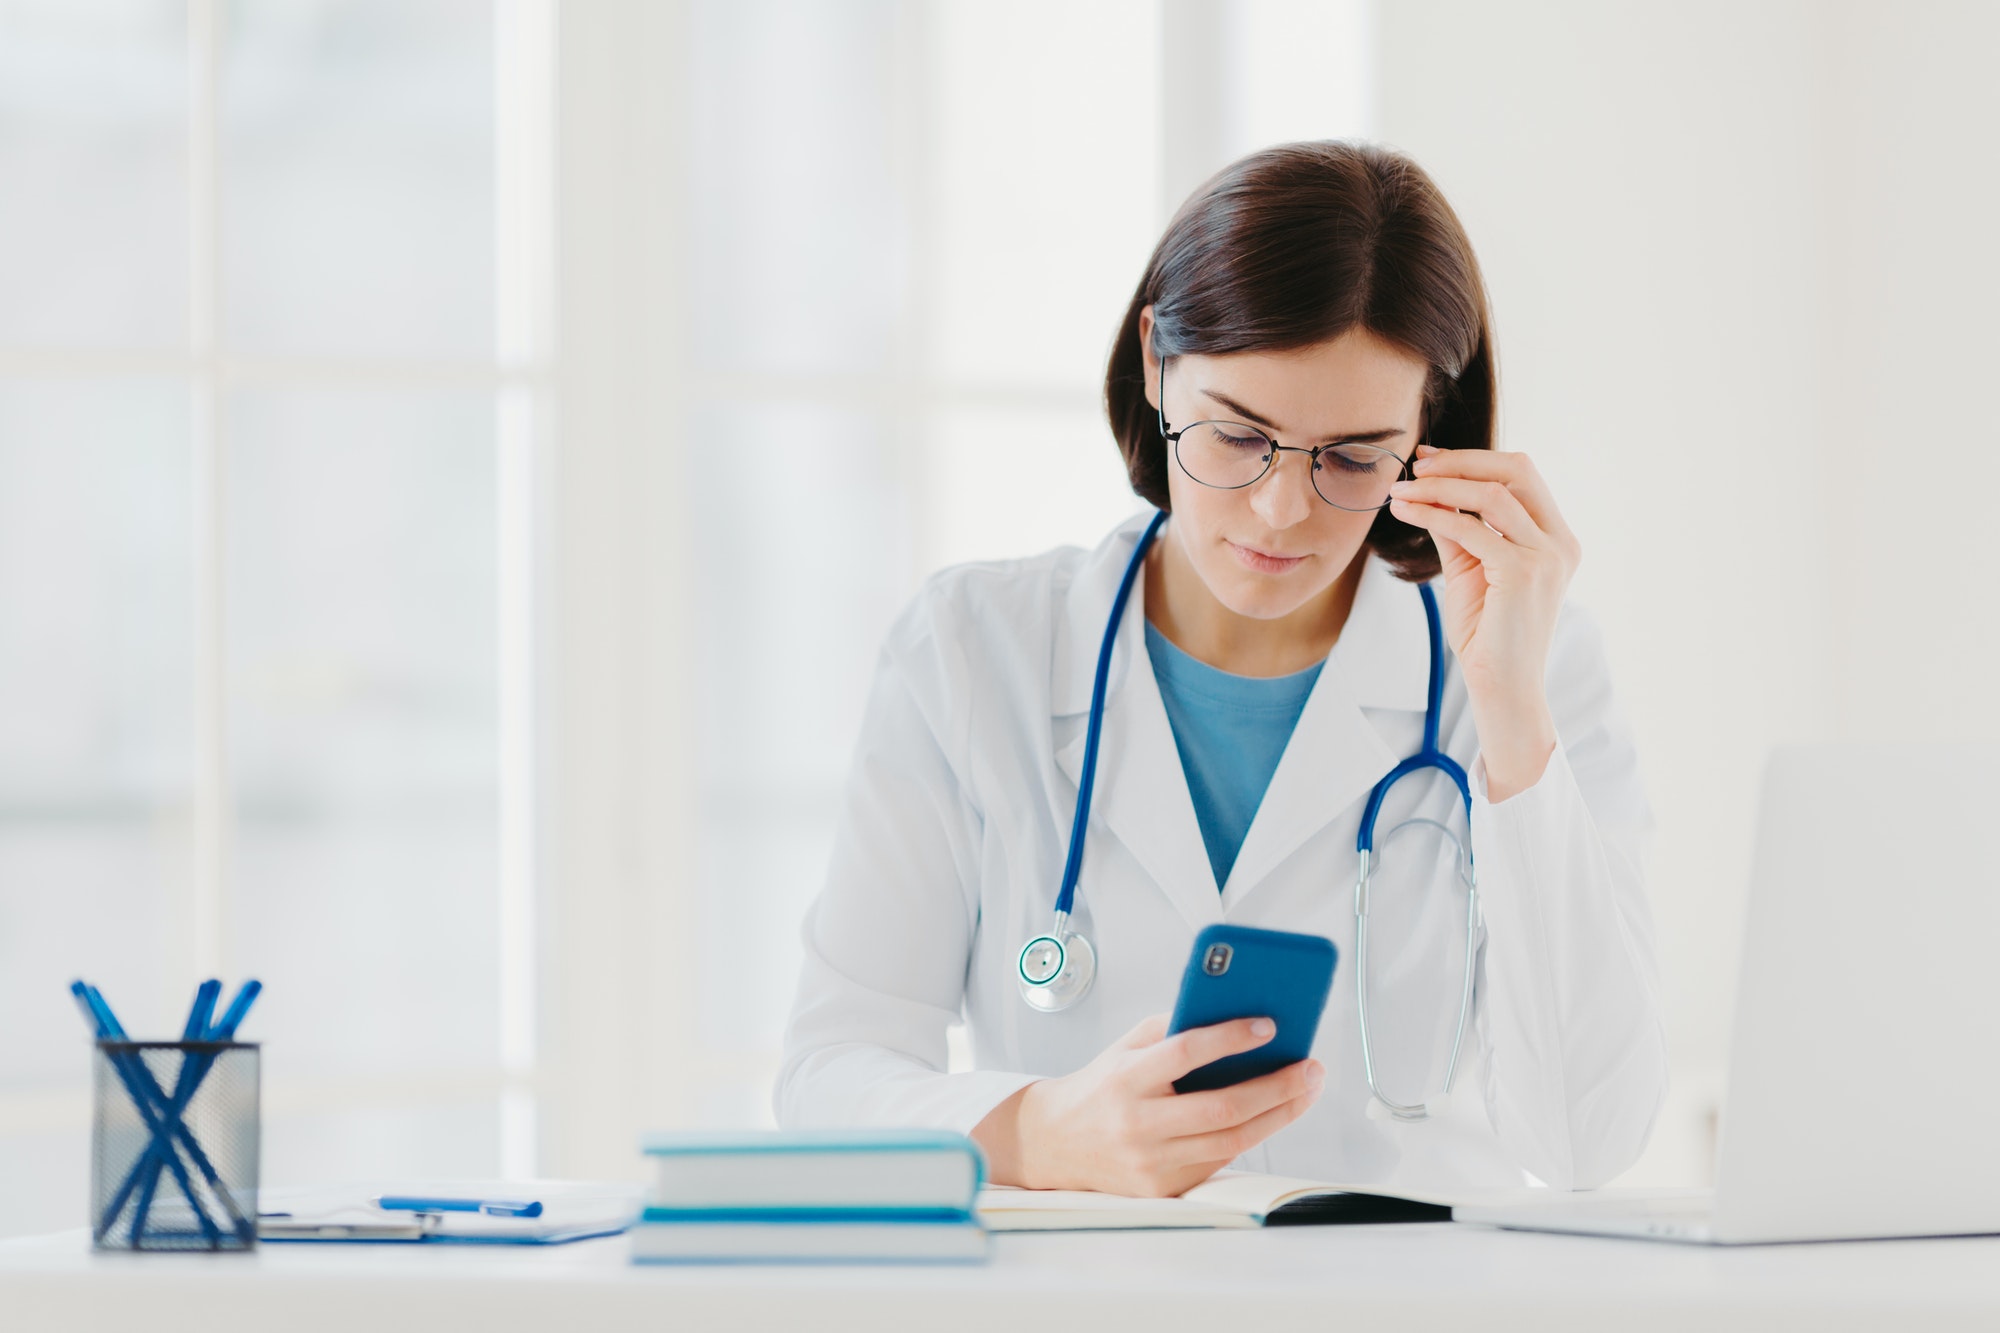 Concentrated woman doctor looks at smartphone device